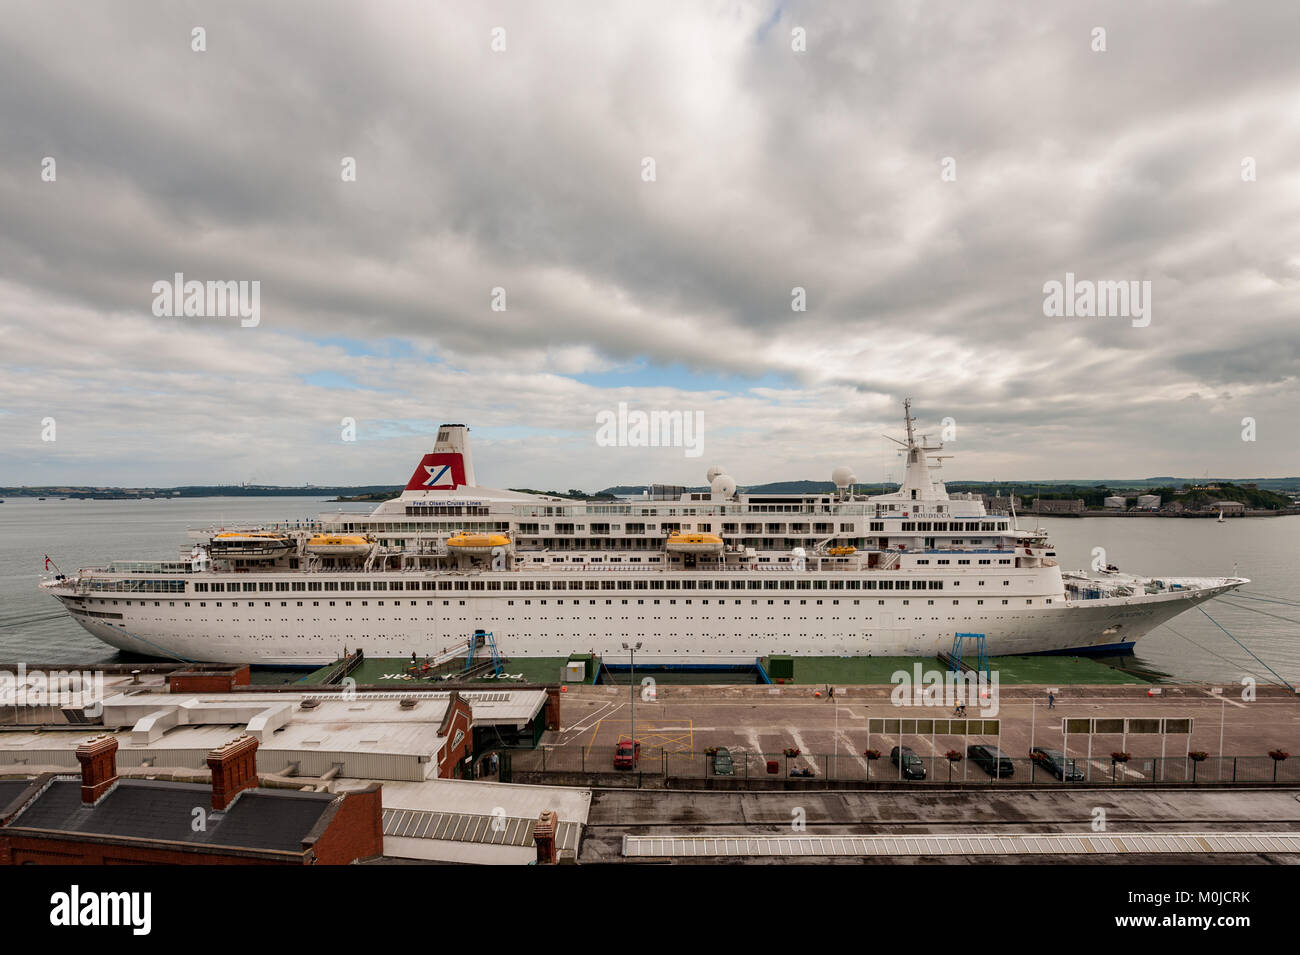 Cruise liner 'Boudicca' moored at Cobh Cruise Terminal, Port of Cork, Cobh, County Cork, Ireland with copy space Stock Photo